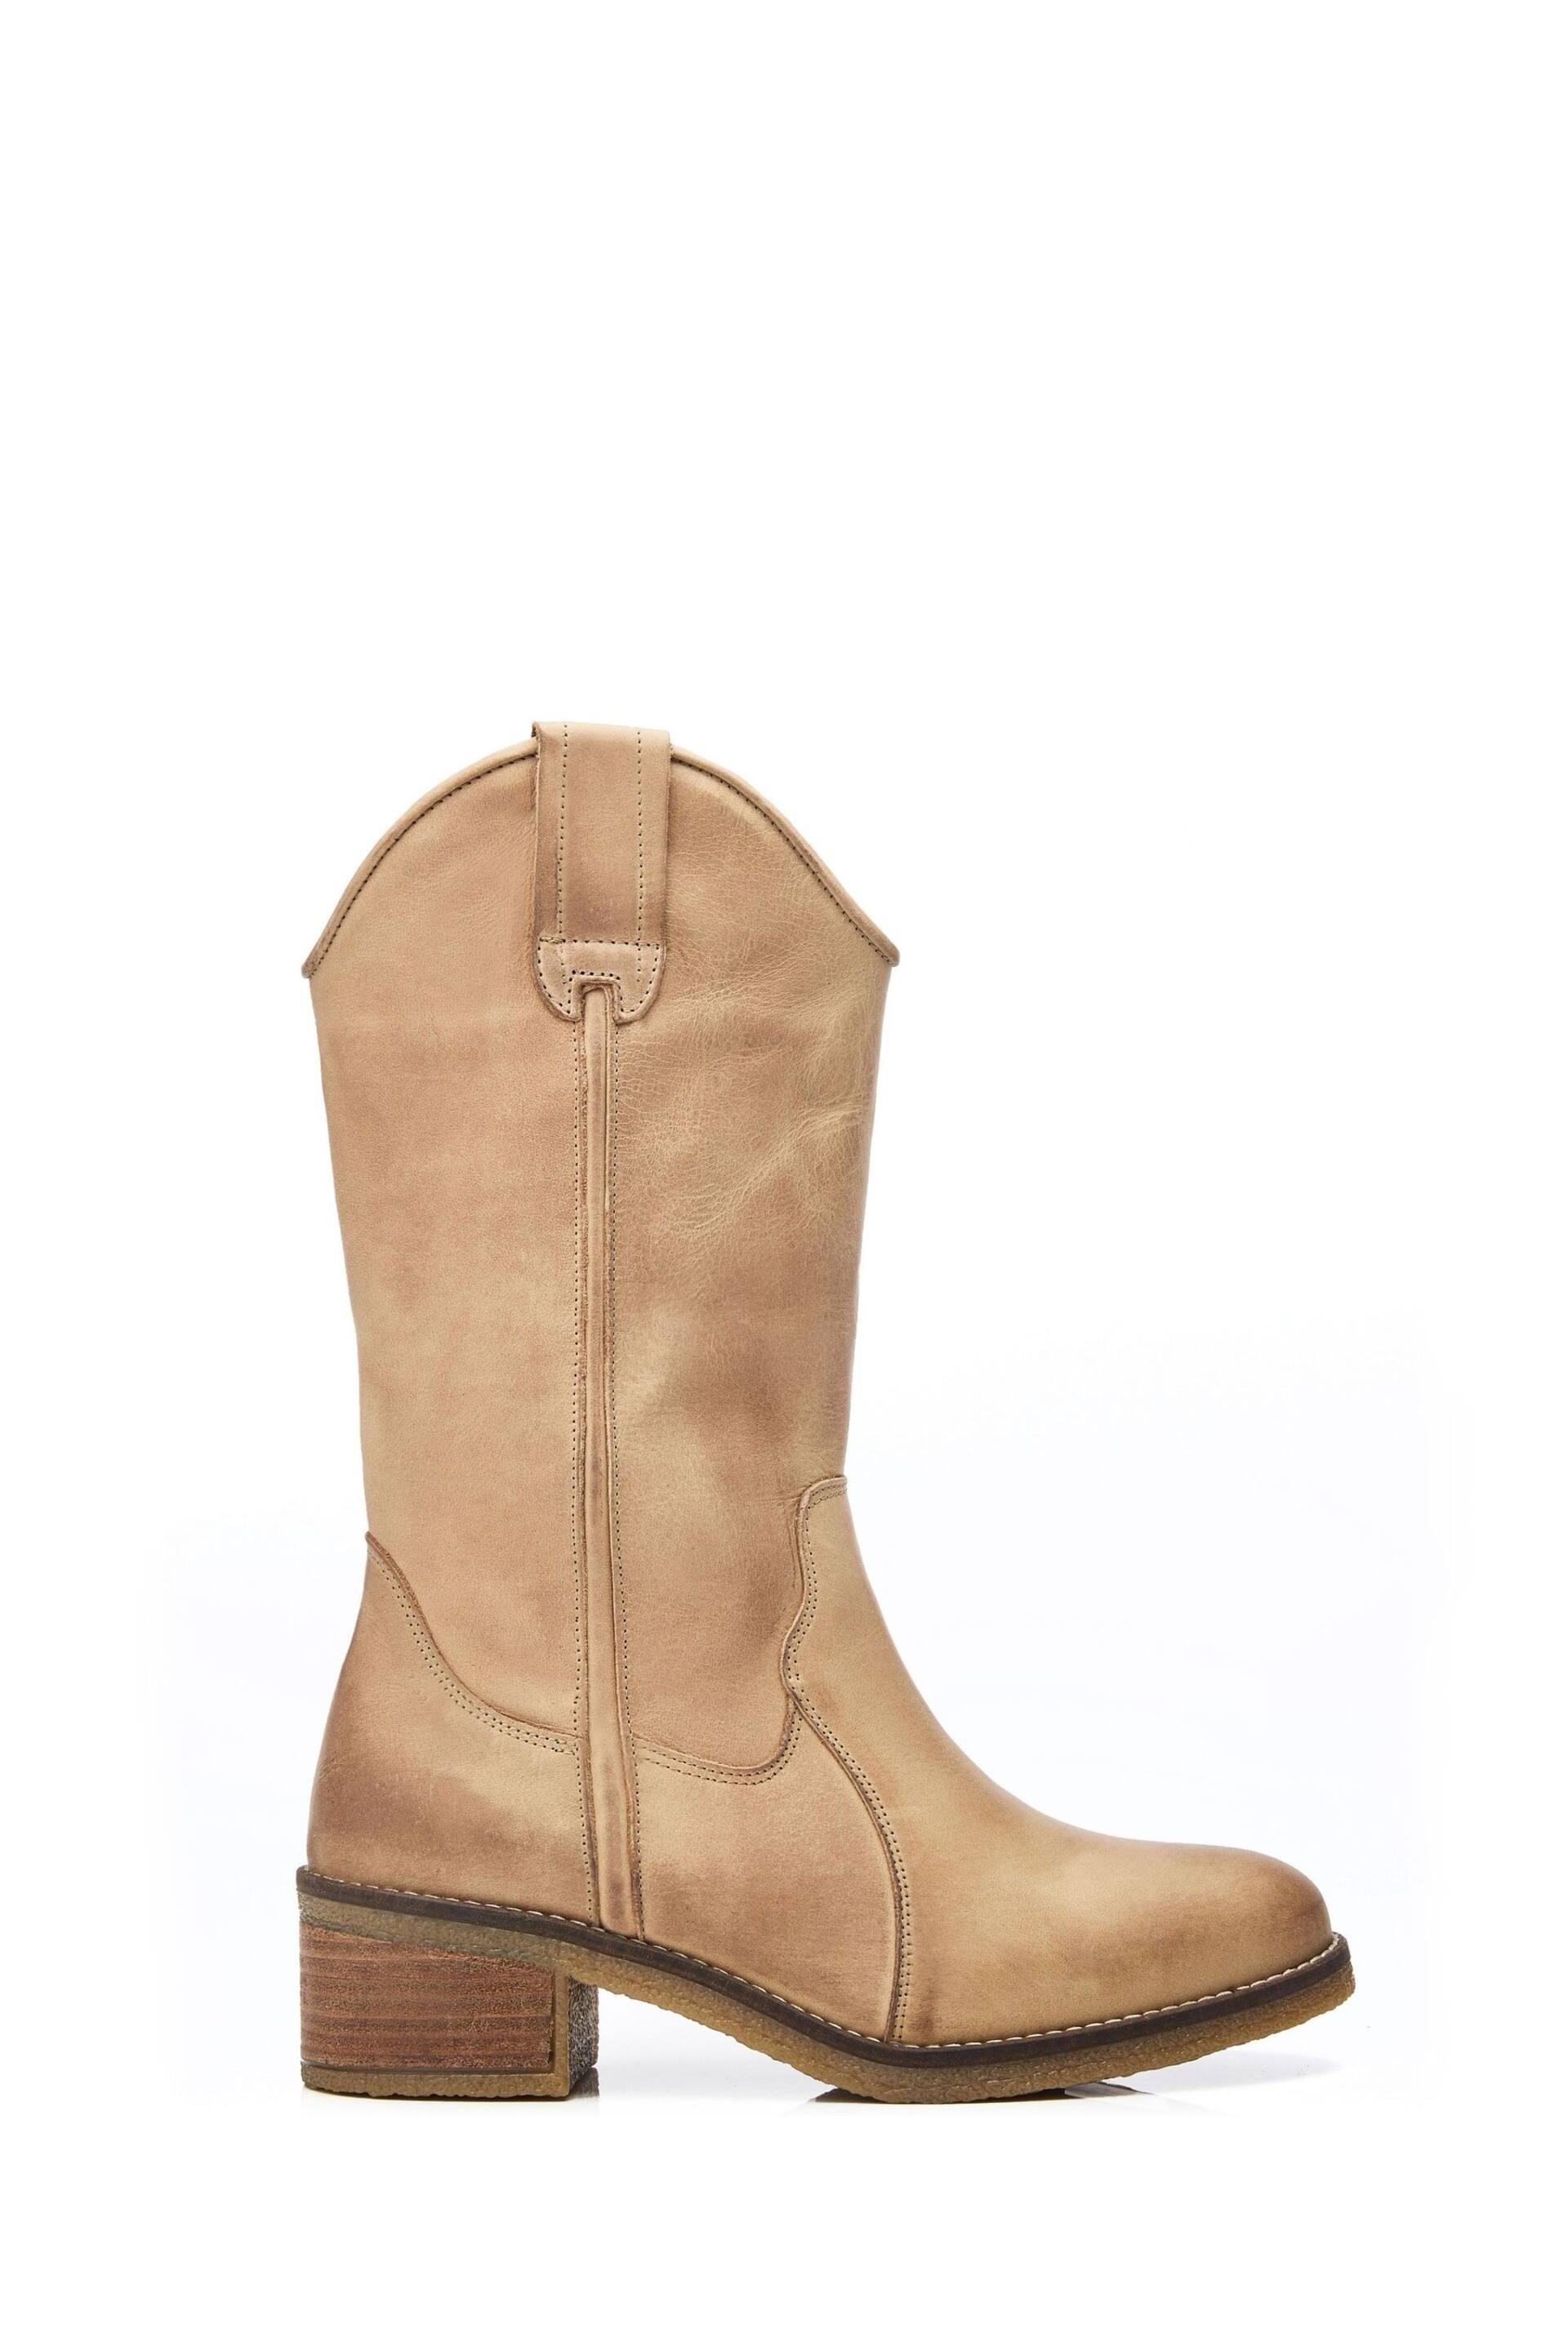 Moda in Pelle Dana Crepe Sole Long Western Natural Boots - Image 1 of 4